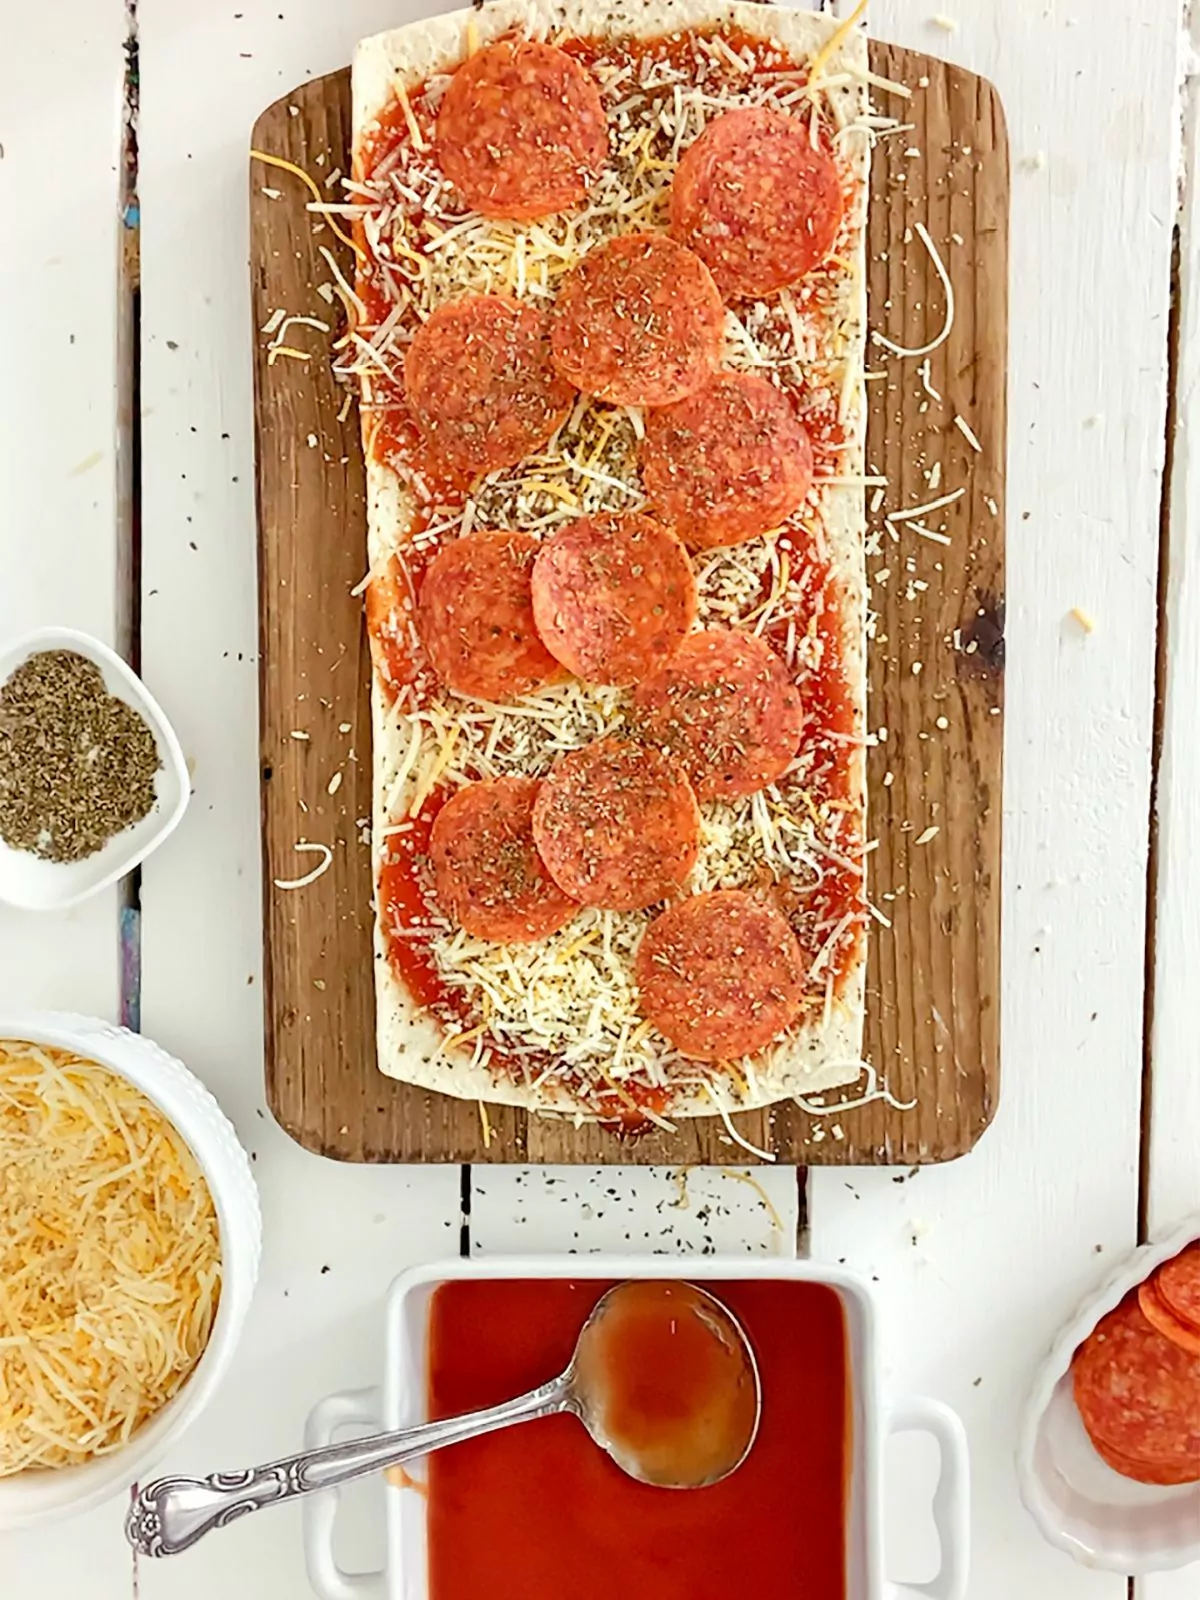 unbaked pepperoni pizza made with naan bread on cutting board.